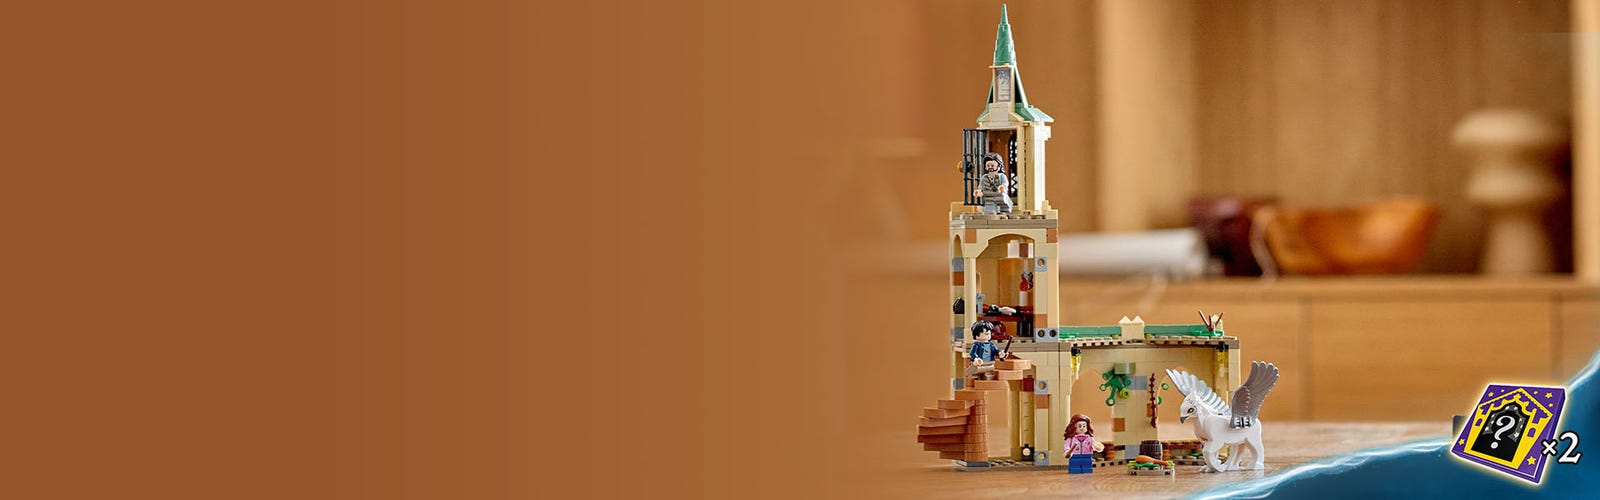 LEGO Harry Potter Hogwarts Courtyard: Sirius’s Rescue 76401 Building Set  (345 Pieces) - JCPenney